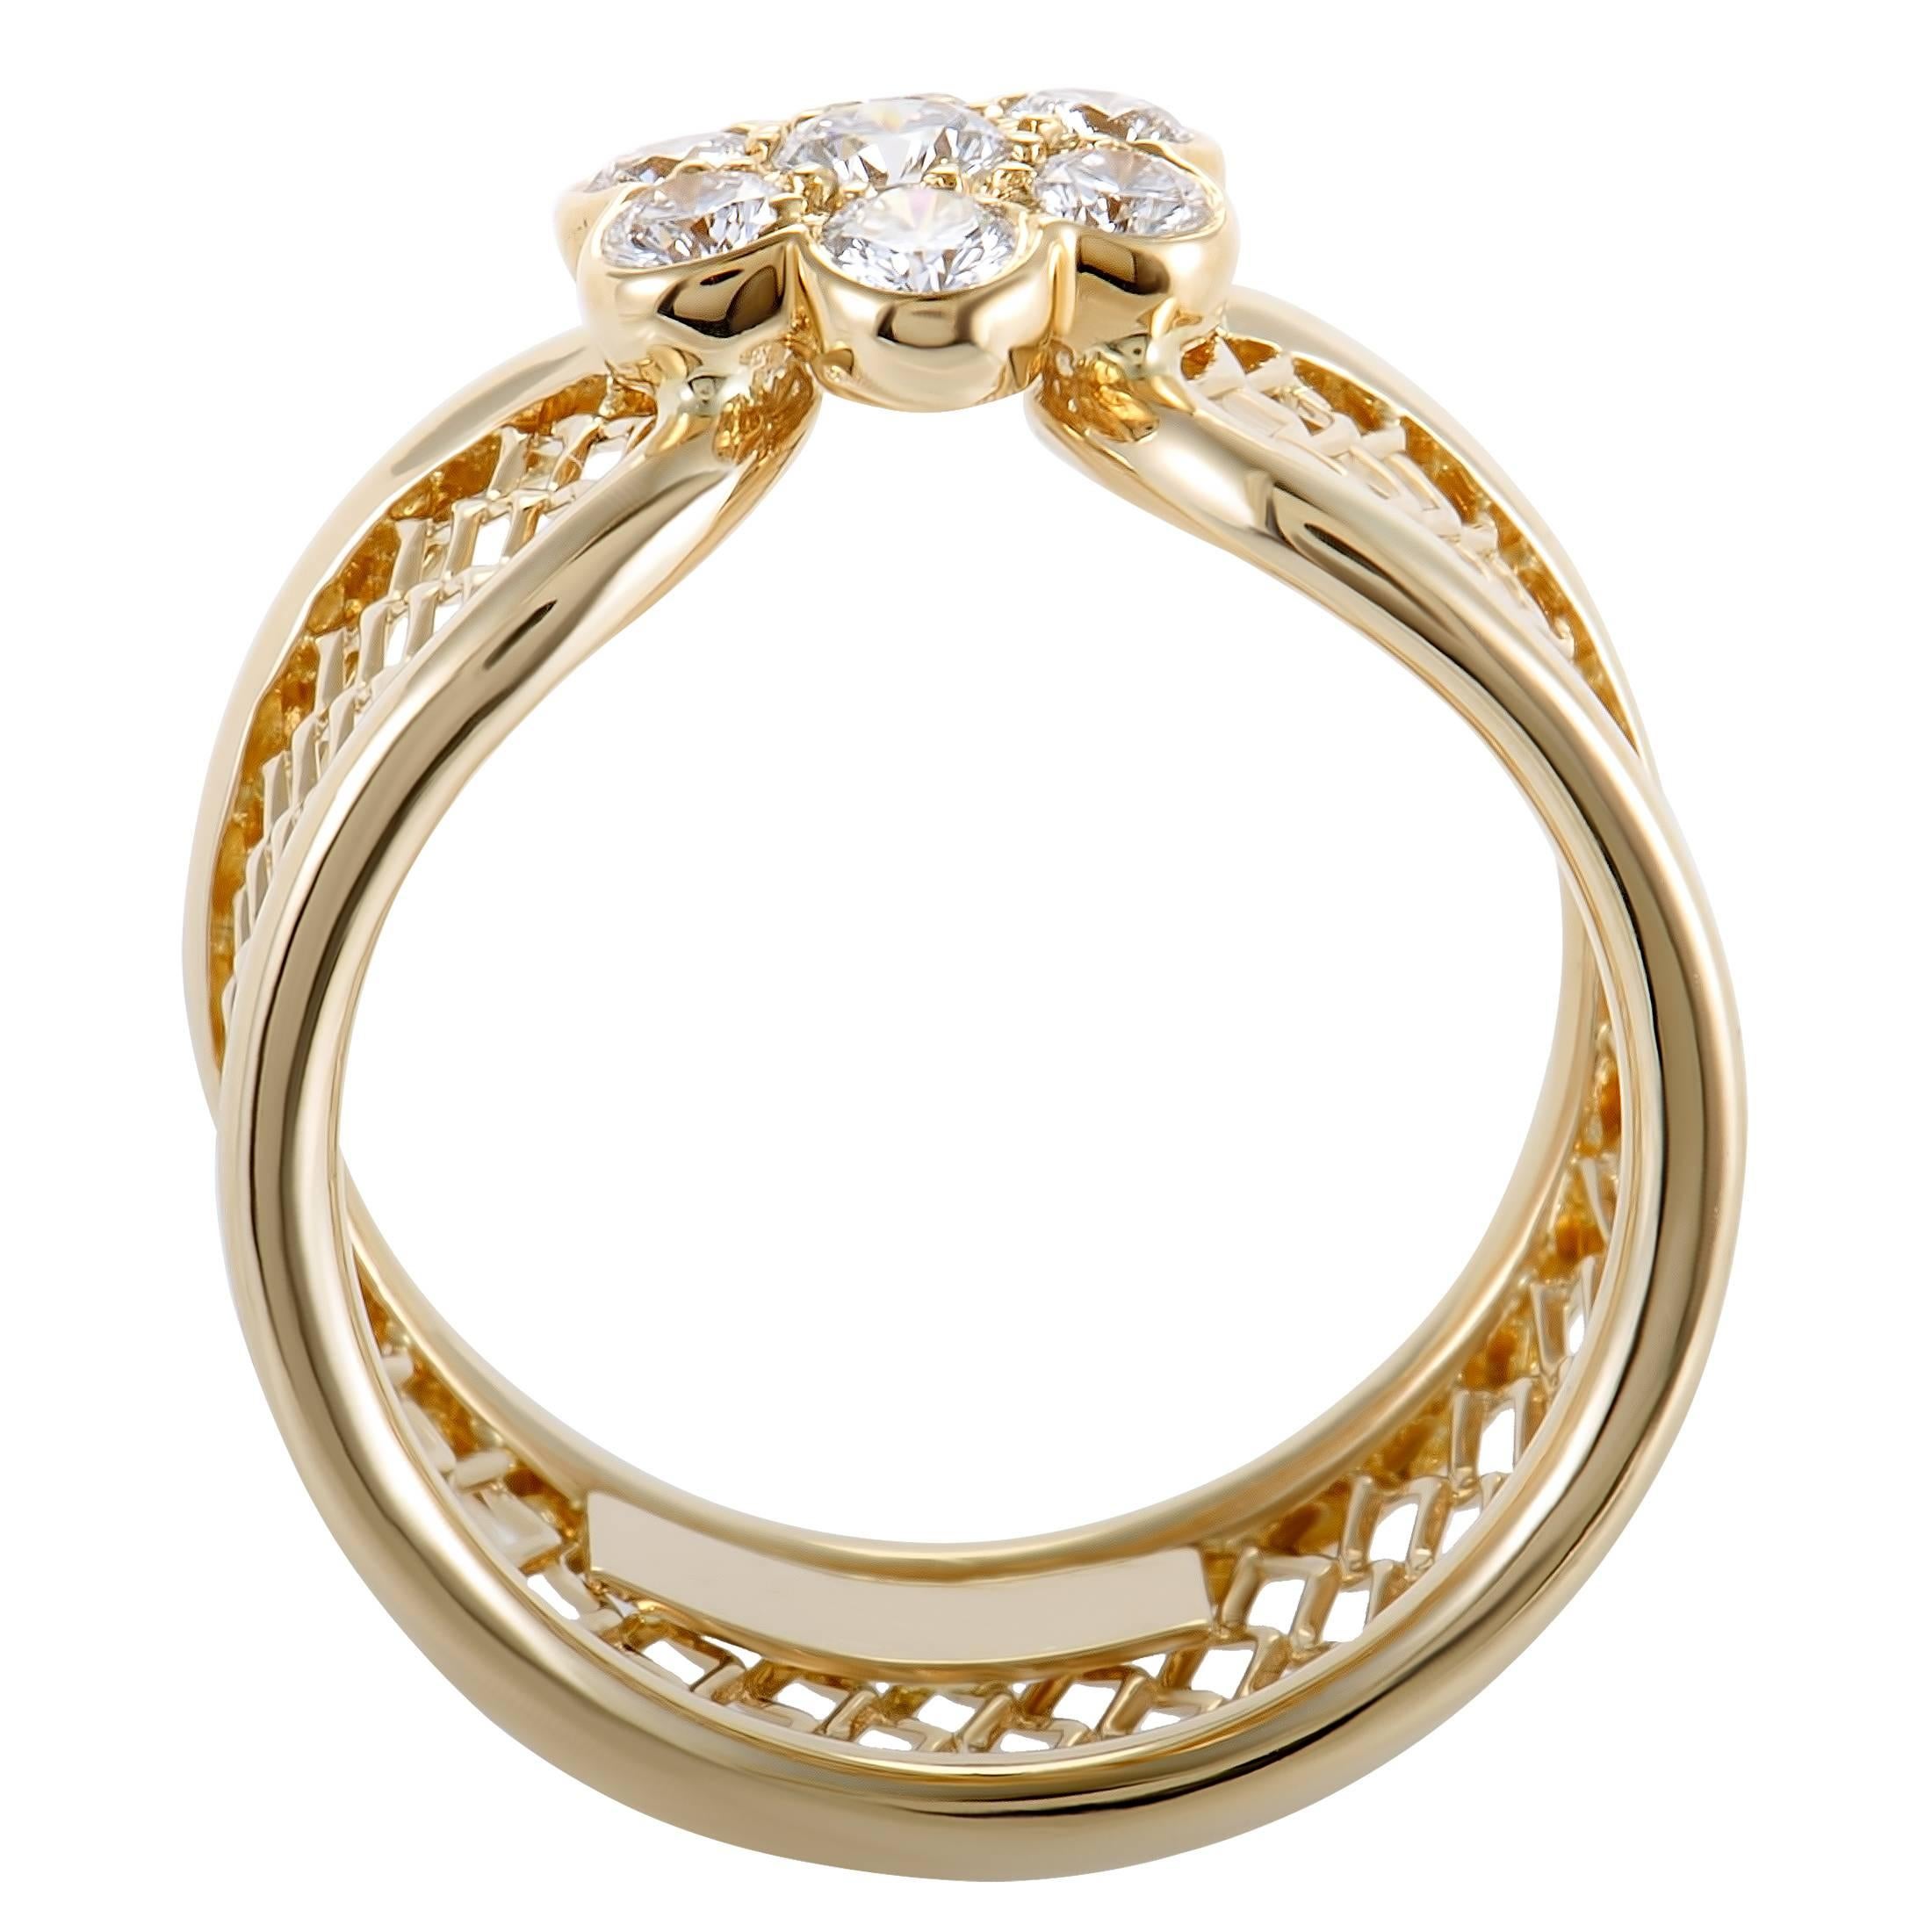 Boasting the endearingly intricate and stylish design the brand is known for, this splendid ring presented by Van Cleef & Arpels features exceptionally refined appearance. Made of 18K yellow gold, the ring is decorated with 0.34 carats of diamonds